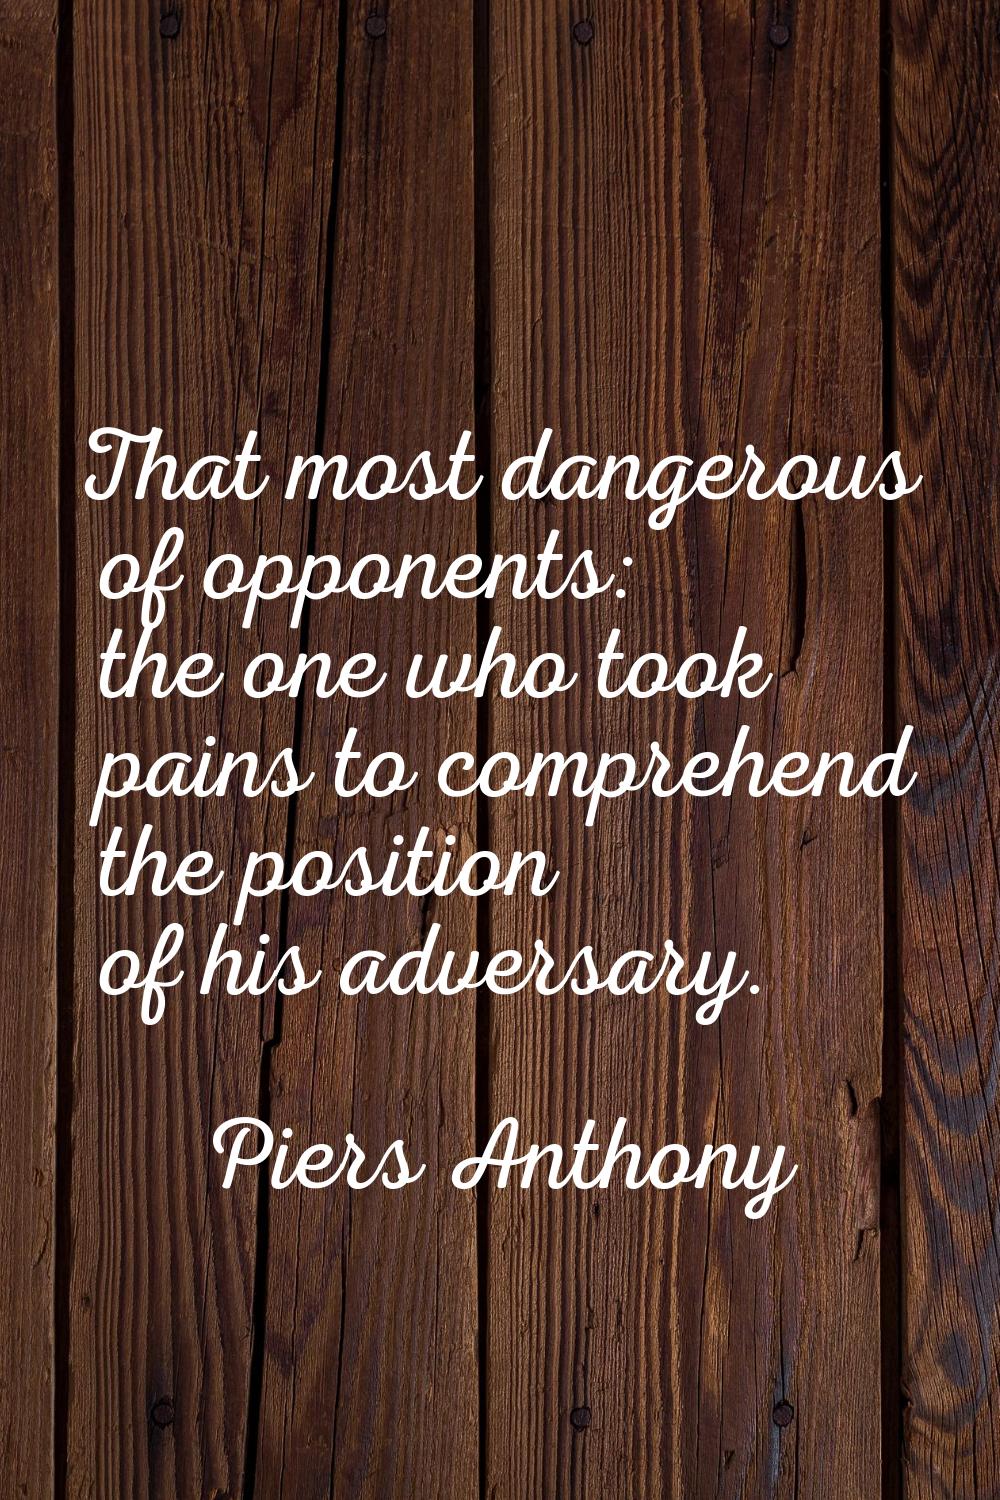 That most dangerous of opponents: the one who took pains to comprehend the position of his adversar